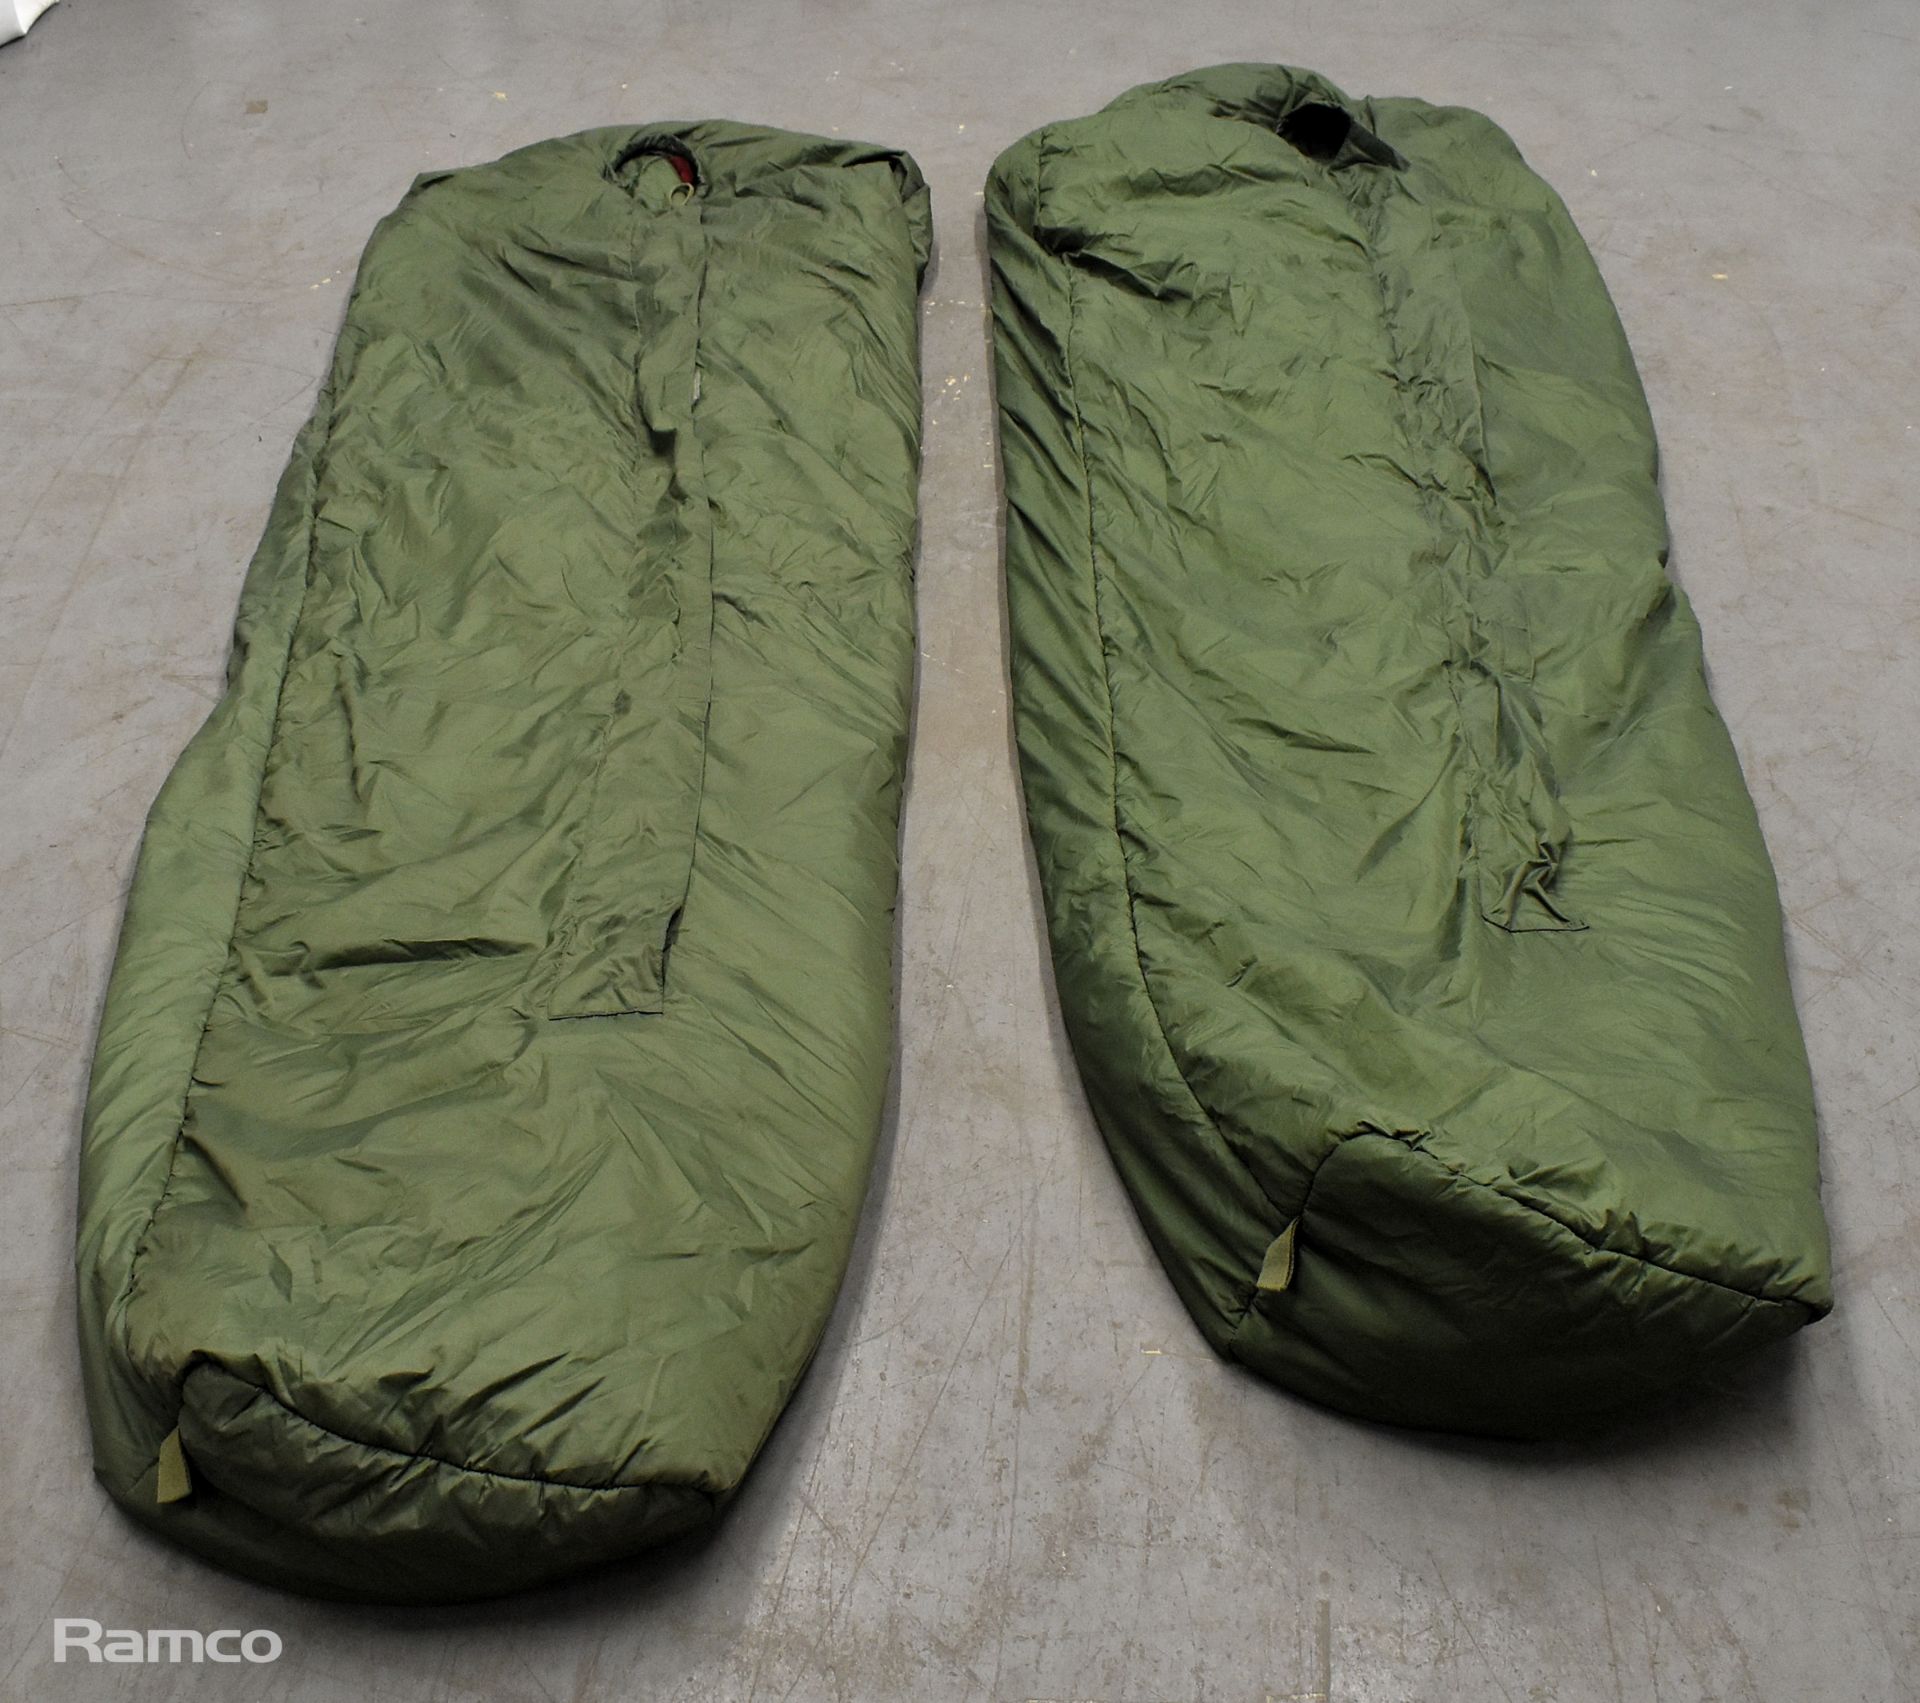 30x Sleeping bags - mixed grades and sizes - Image 4 of 8